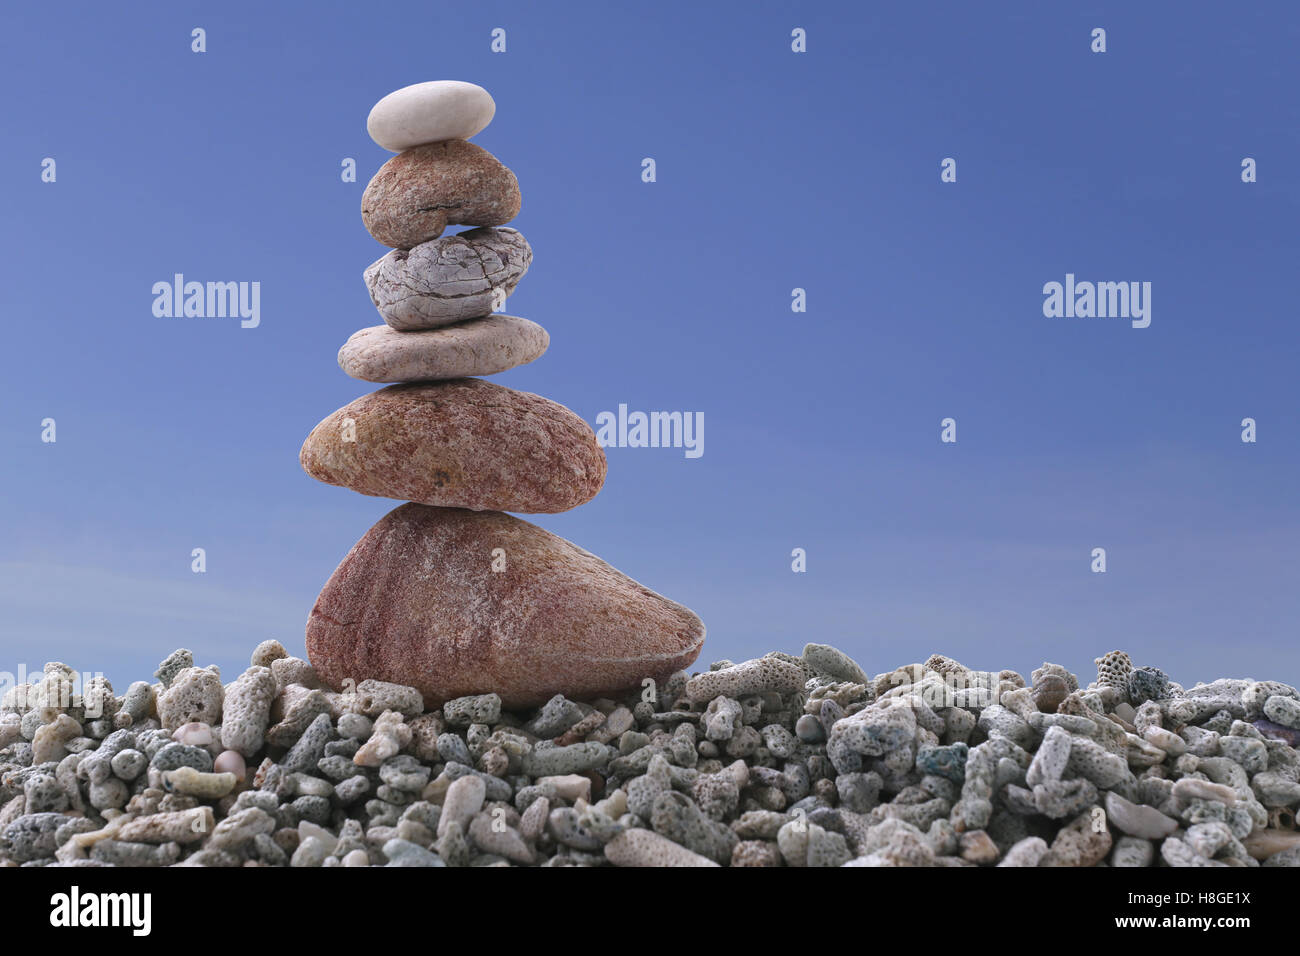 Balance stone on pile rock with blue sky background for concept of Zen and calm. Stock Photo